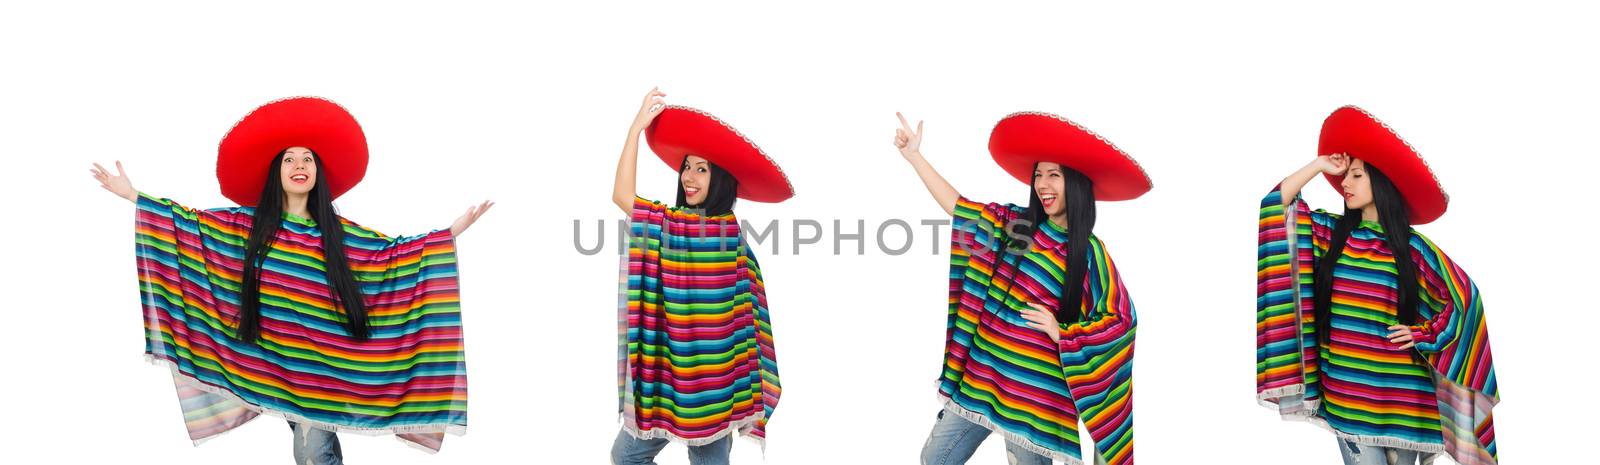 Mexican woman in funny concept on white